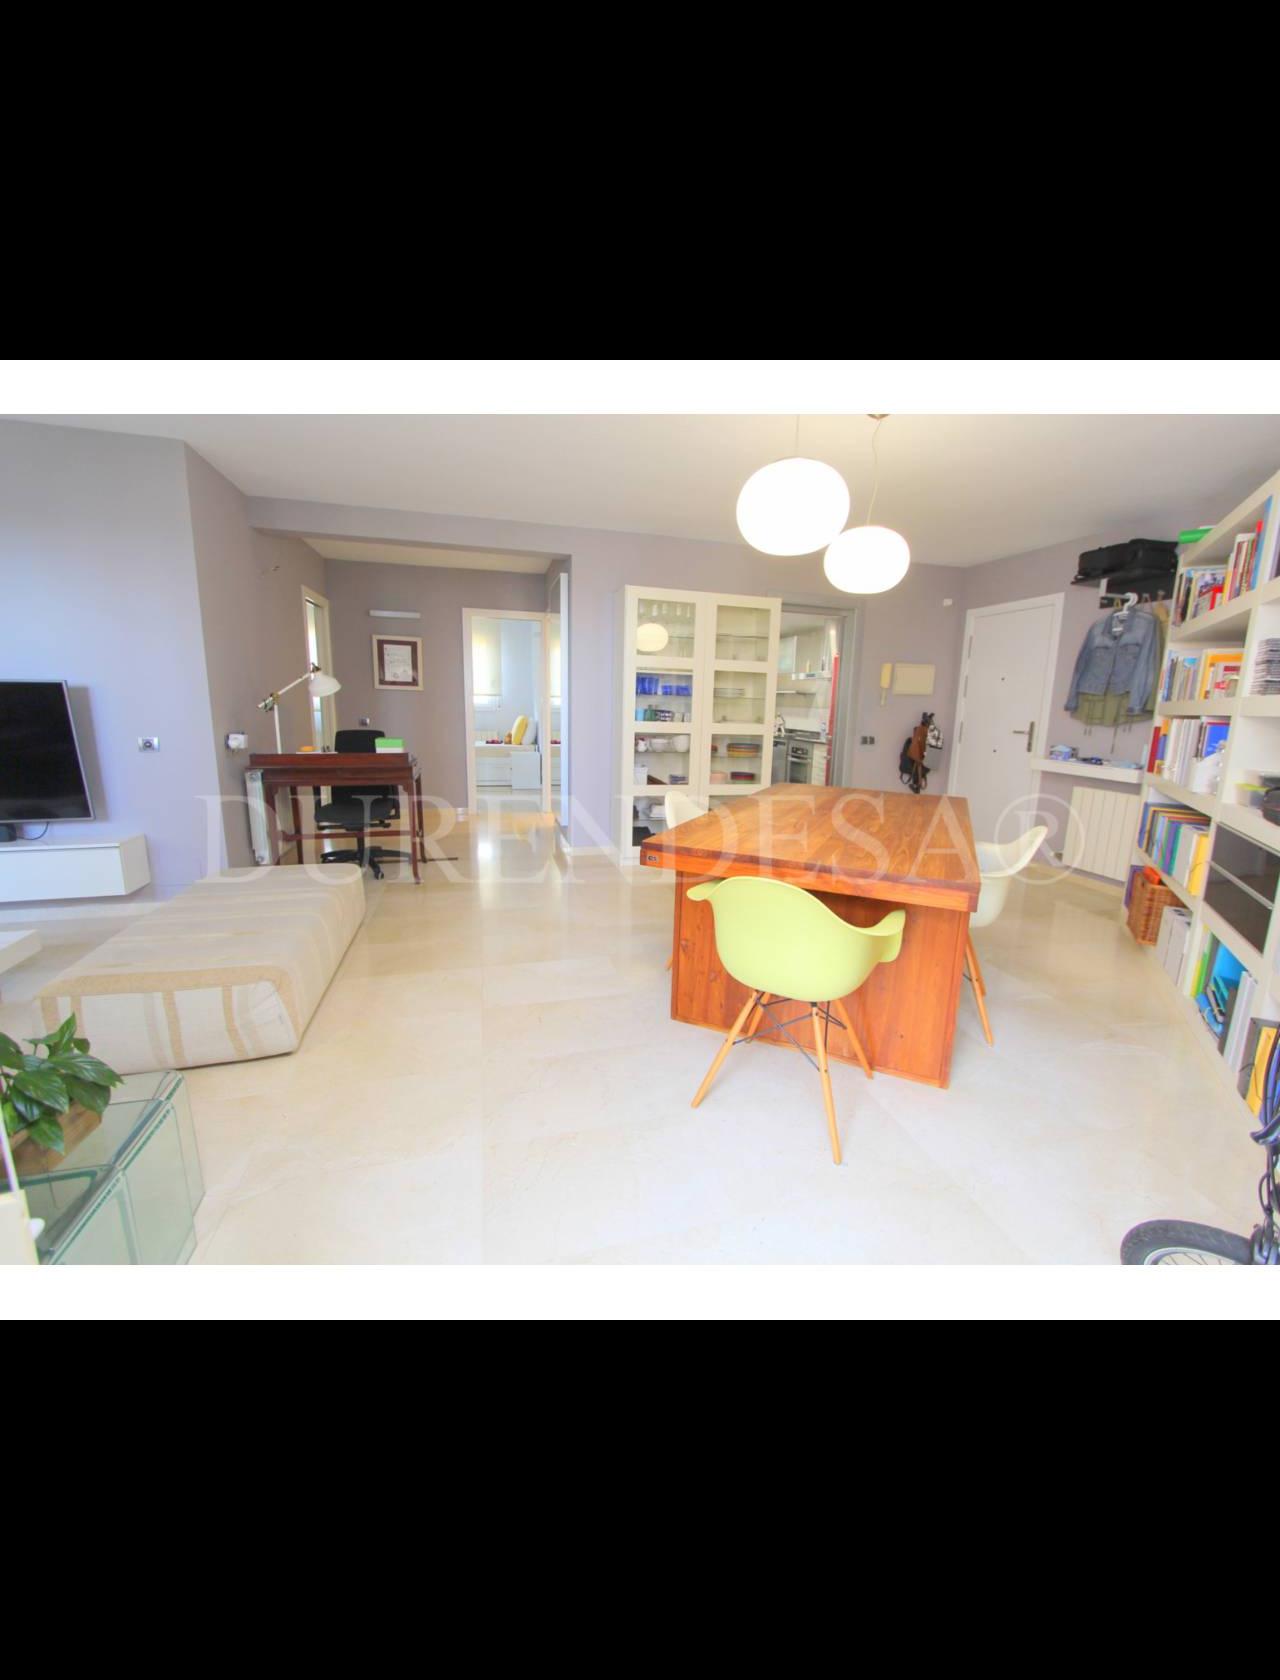 Flat for sale in Es Molinar-Can Pere Antoni